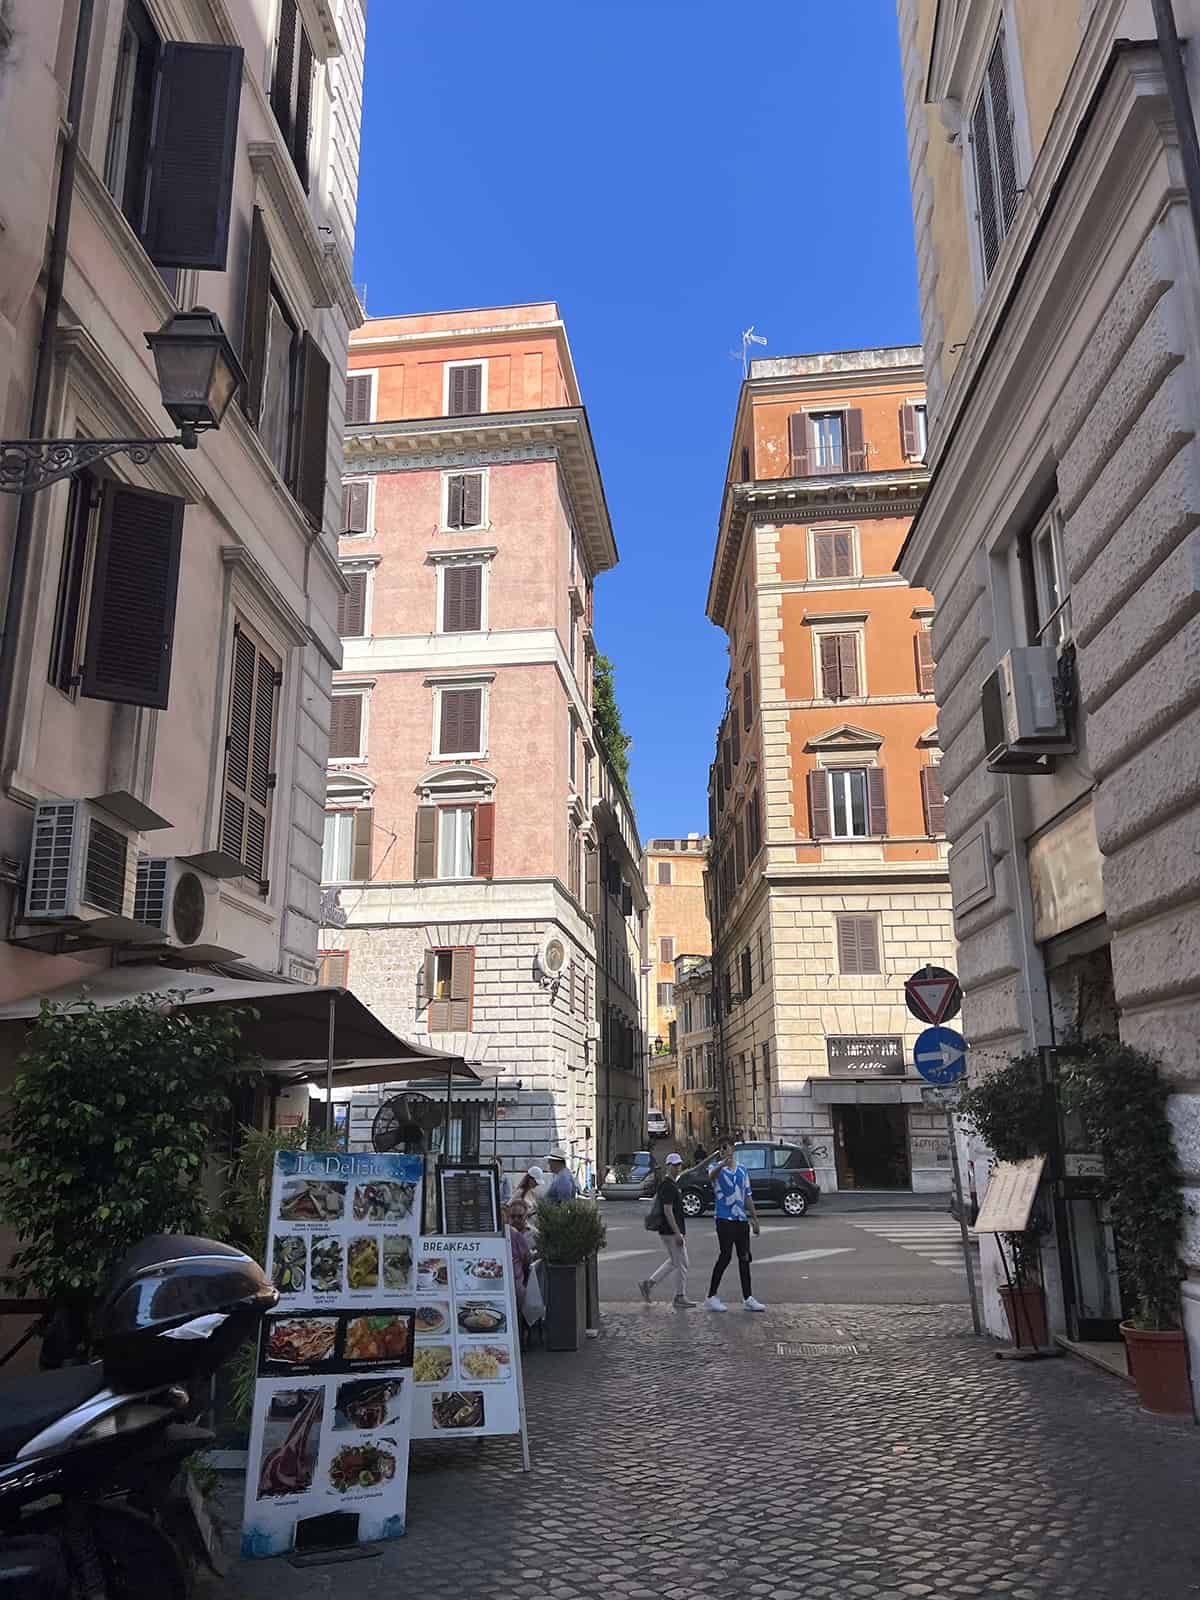 Narrow street with bright orange and pink colored buildings in Rome, Italy - a street accessible by a golf cart